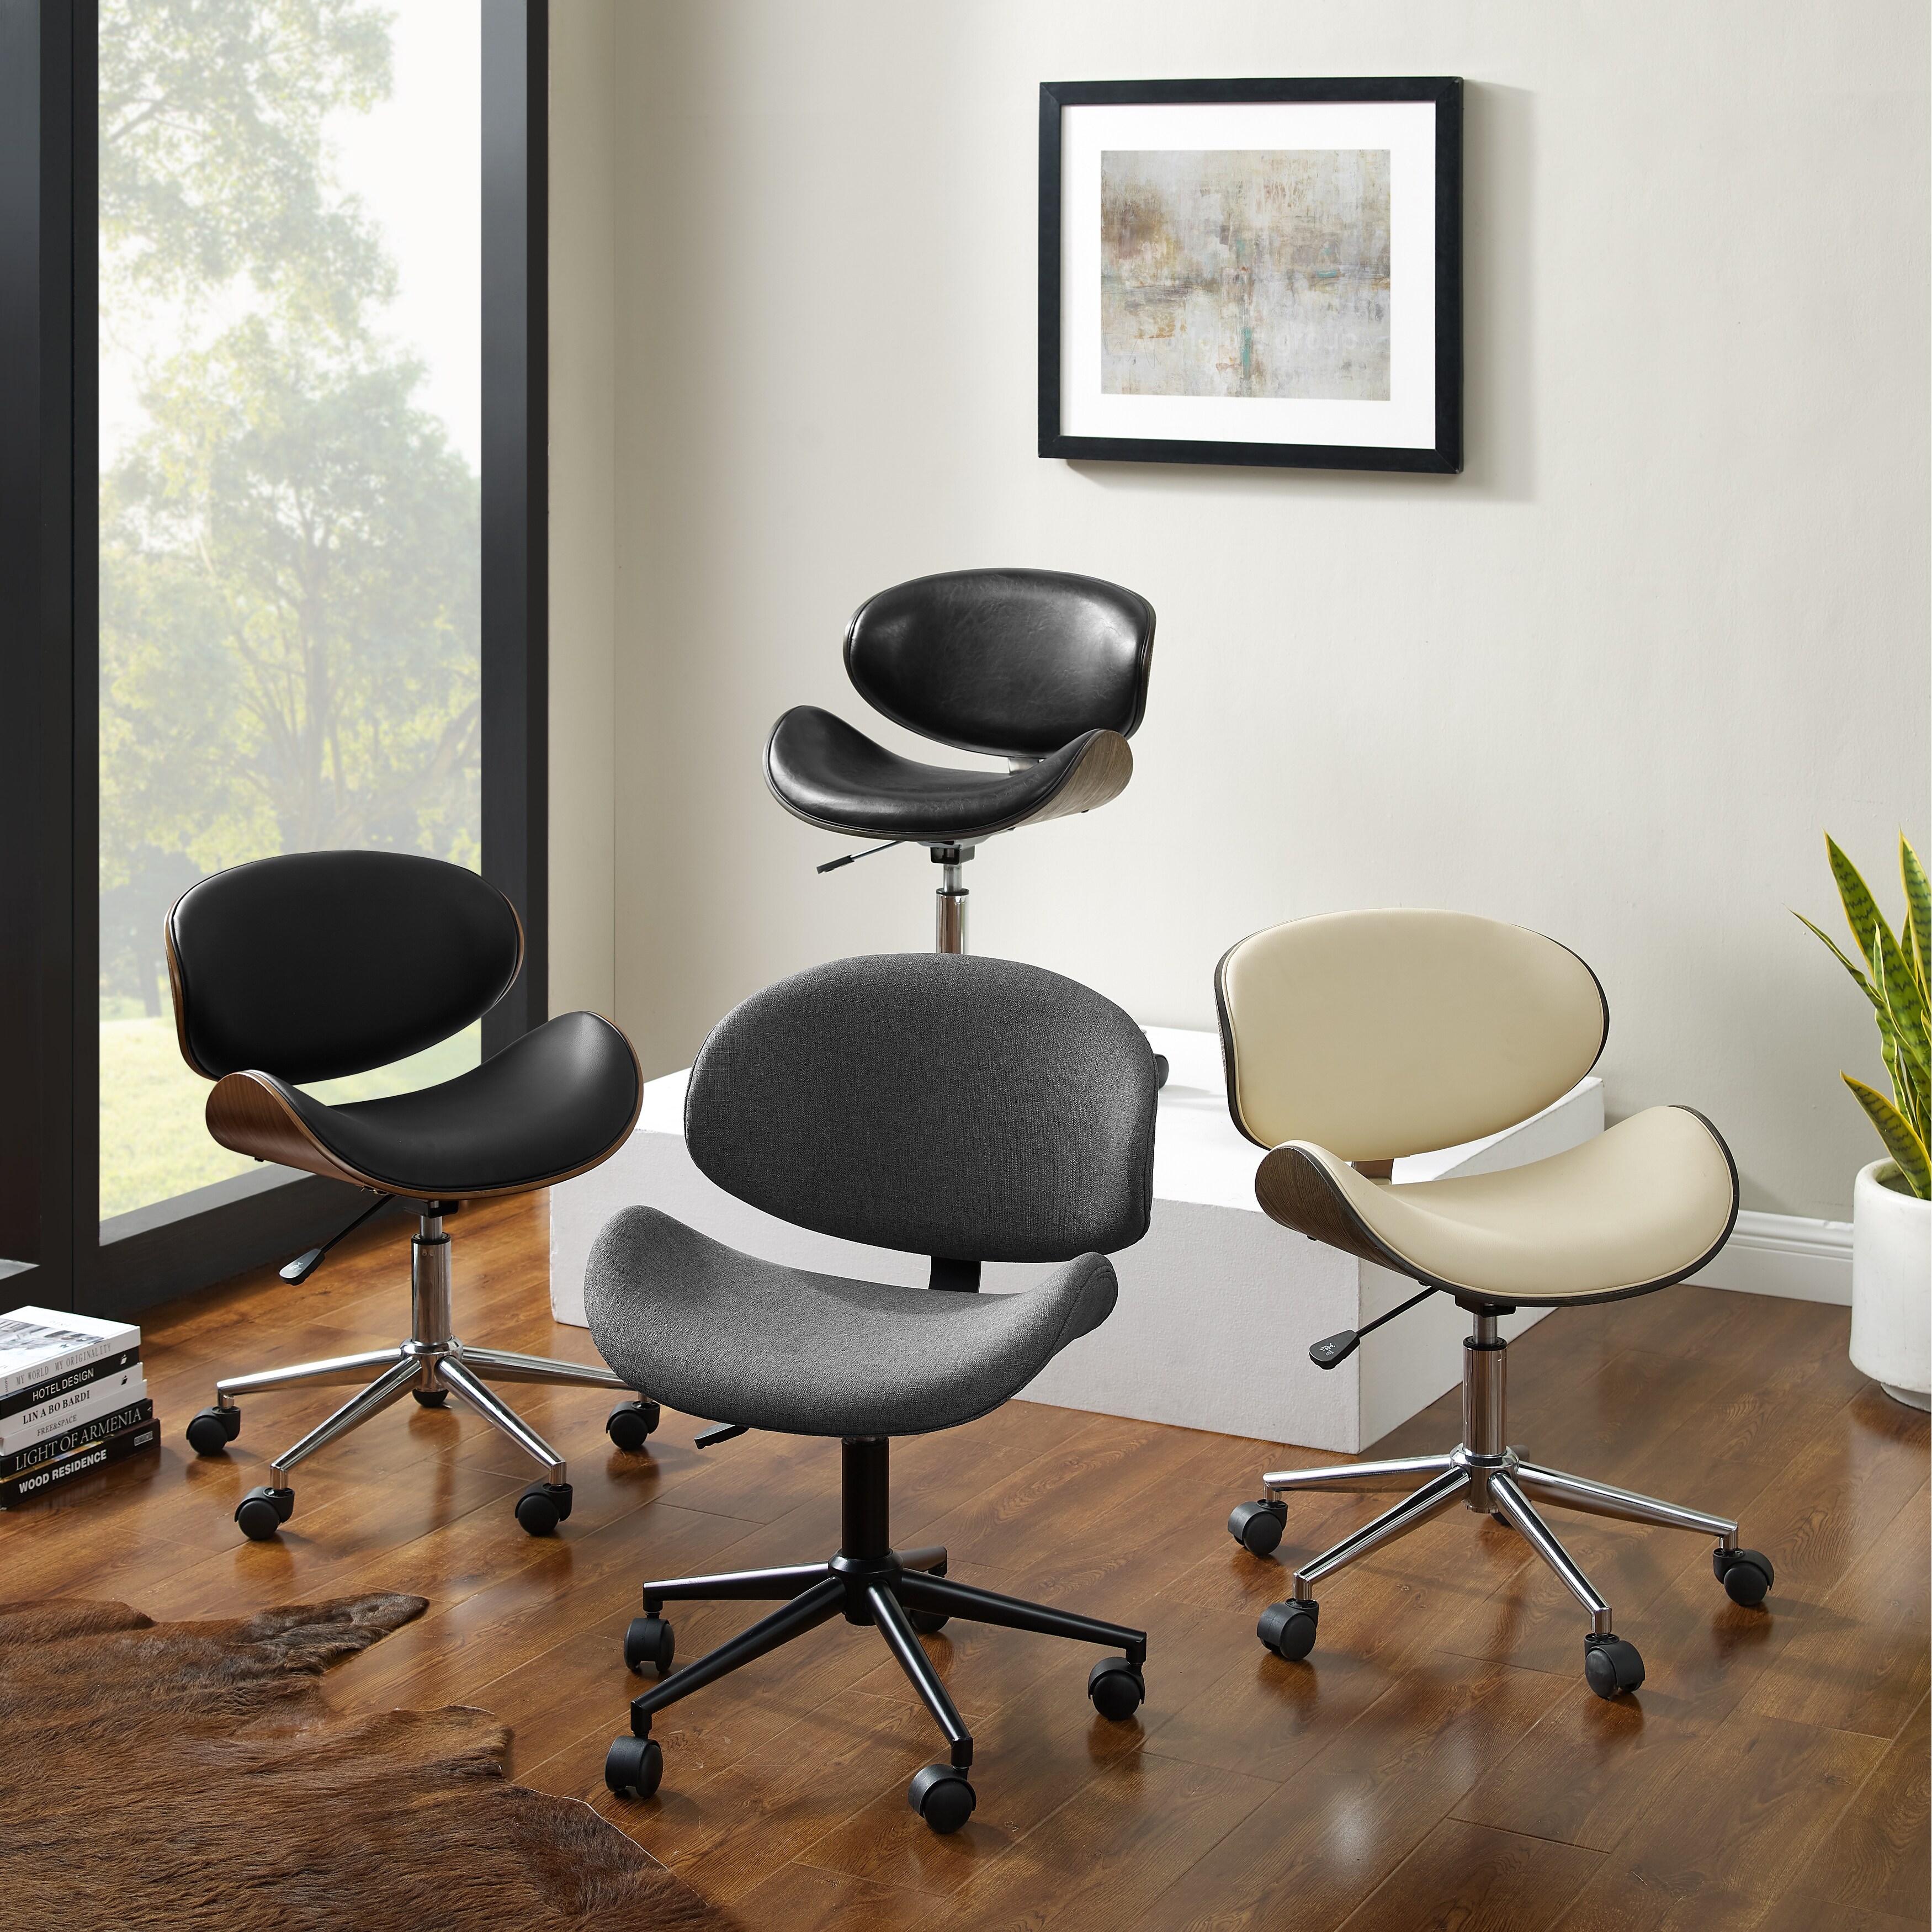 https://ak1.ostkcdn.com/images/products/is/images/direct/d3190b986ee7c7f65f6cb52d2927f71d9cbed43f/Madonna-Mid-century-Adjustable-Office-Chair-by-Corvus.jpg